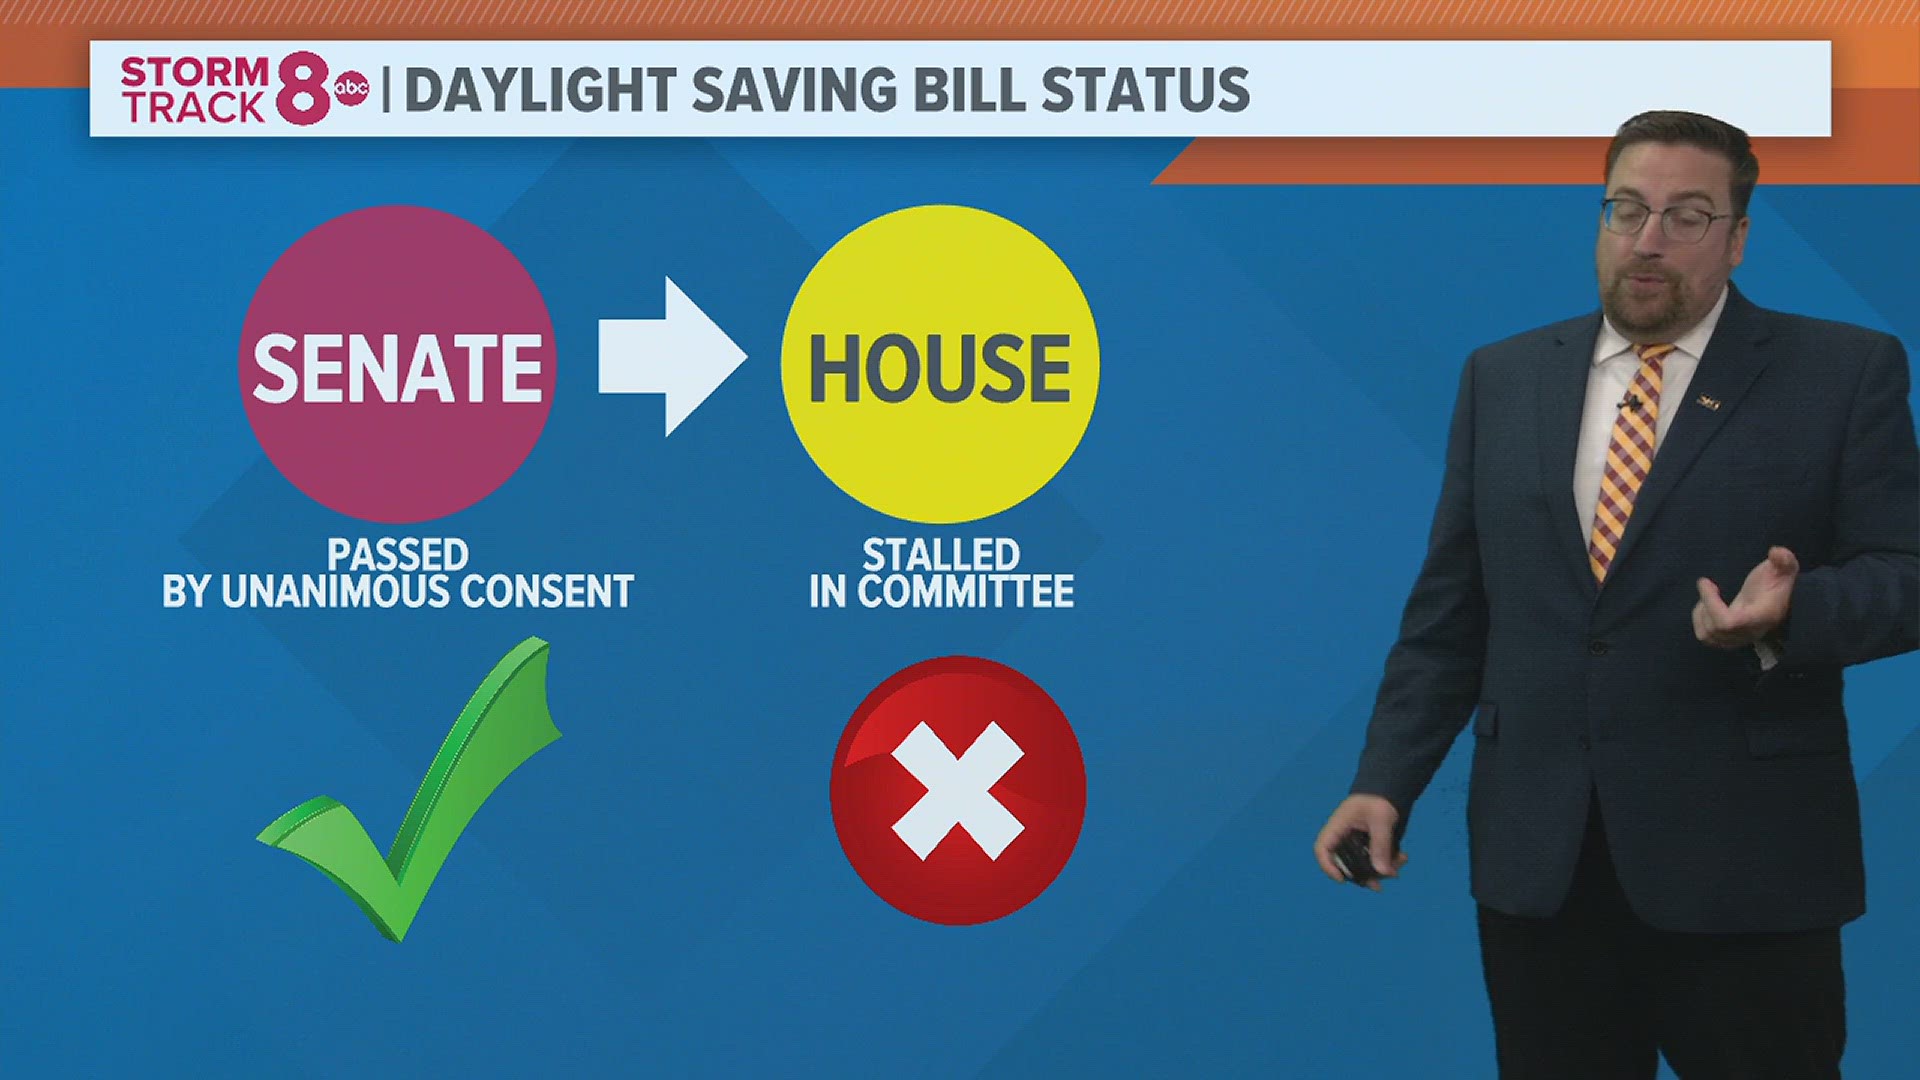 This past spring, a bill was introduced to make daylight saving time permanent. Meteorologist Andrew Stutzke explains where the bill stands right now.